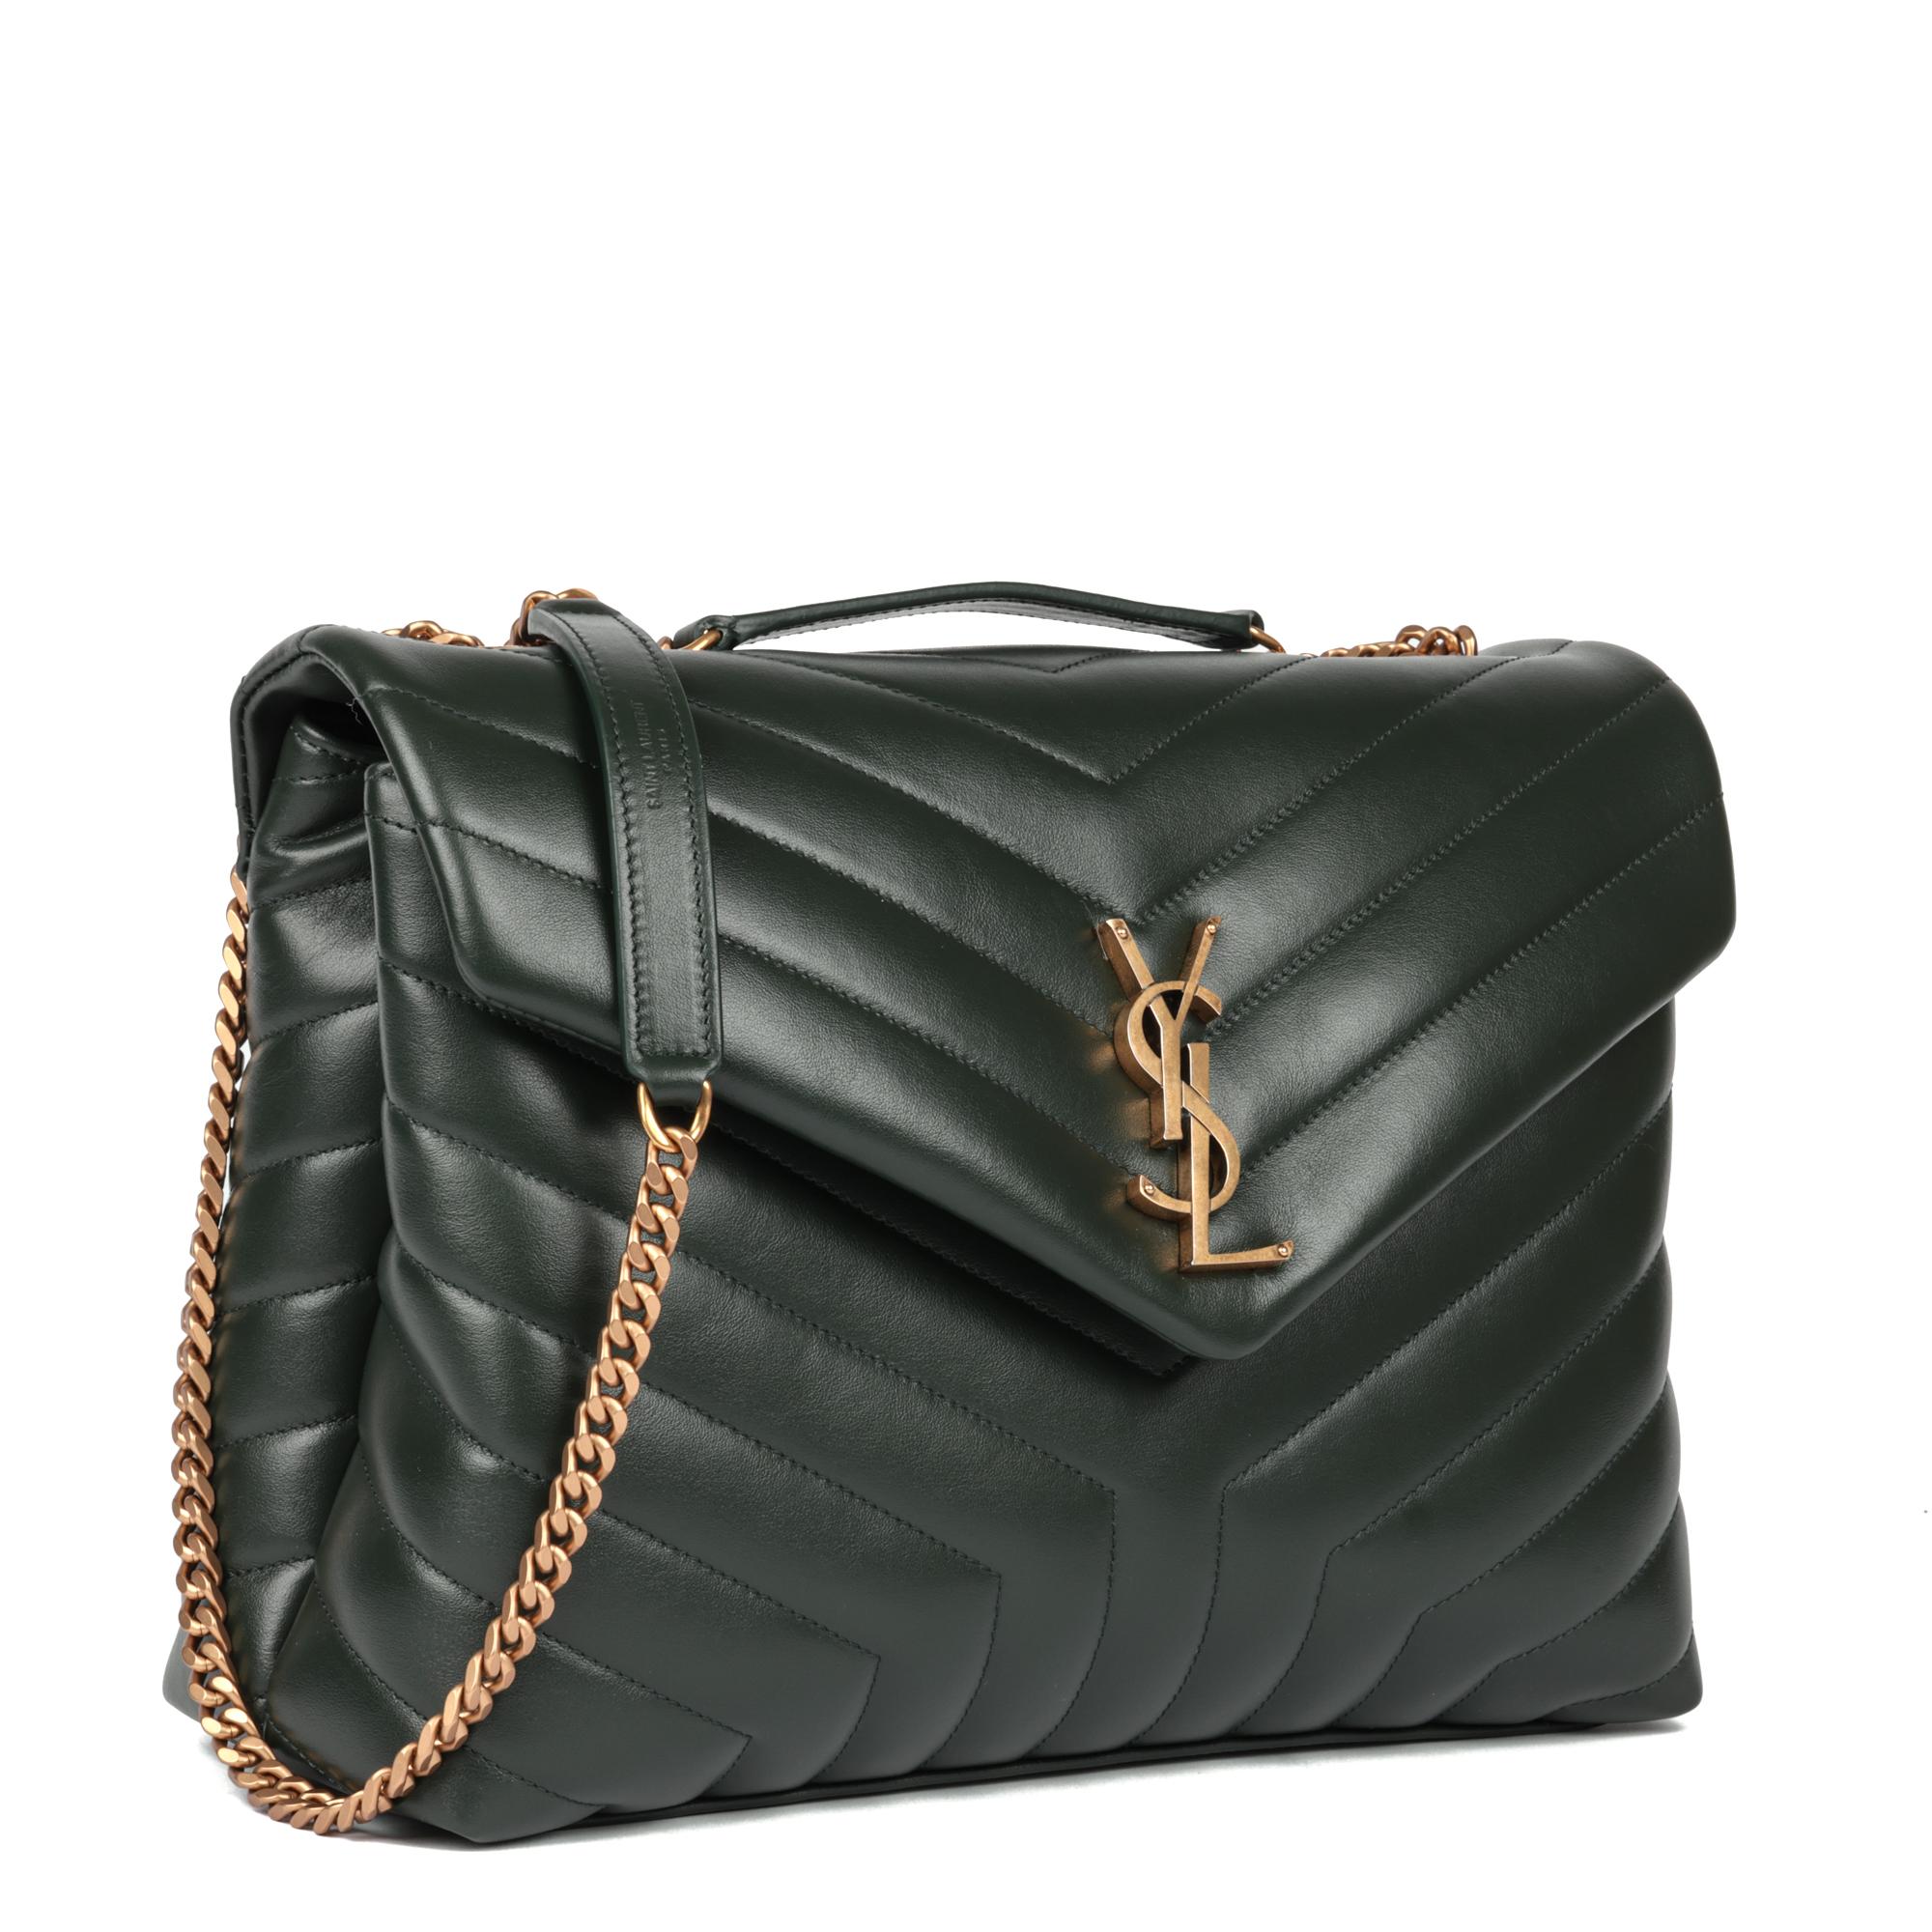 SAINT LAURENT
Green Y Quilted Calfskin Leather Medium Loulou

Serial Number: PMR57574946.0421
Age (Circa): 2022
Accompanied By: Saint Laurent Dust Bag, Care Card
Authenticity Details: Date Stamp (Made in Italy)
Gender: Ladies
Type: Shoulder,